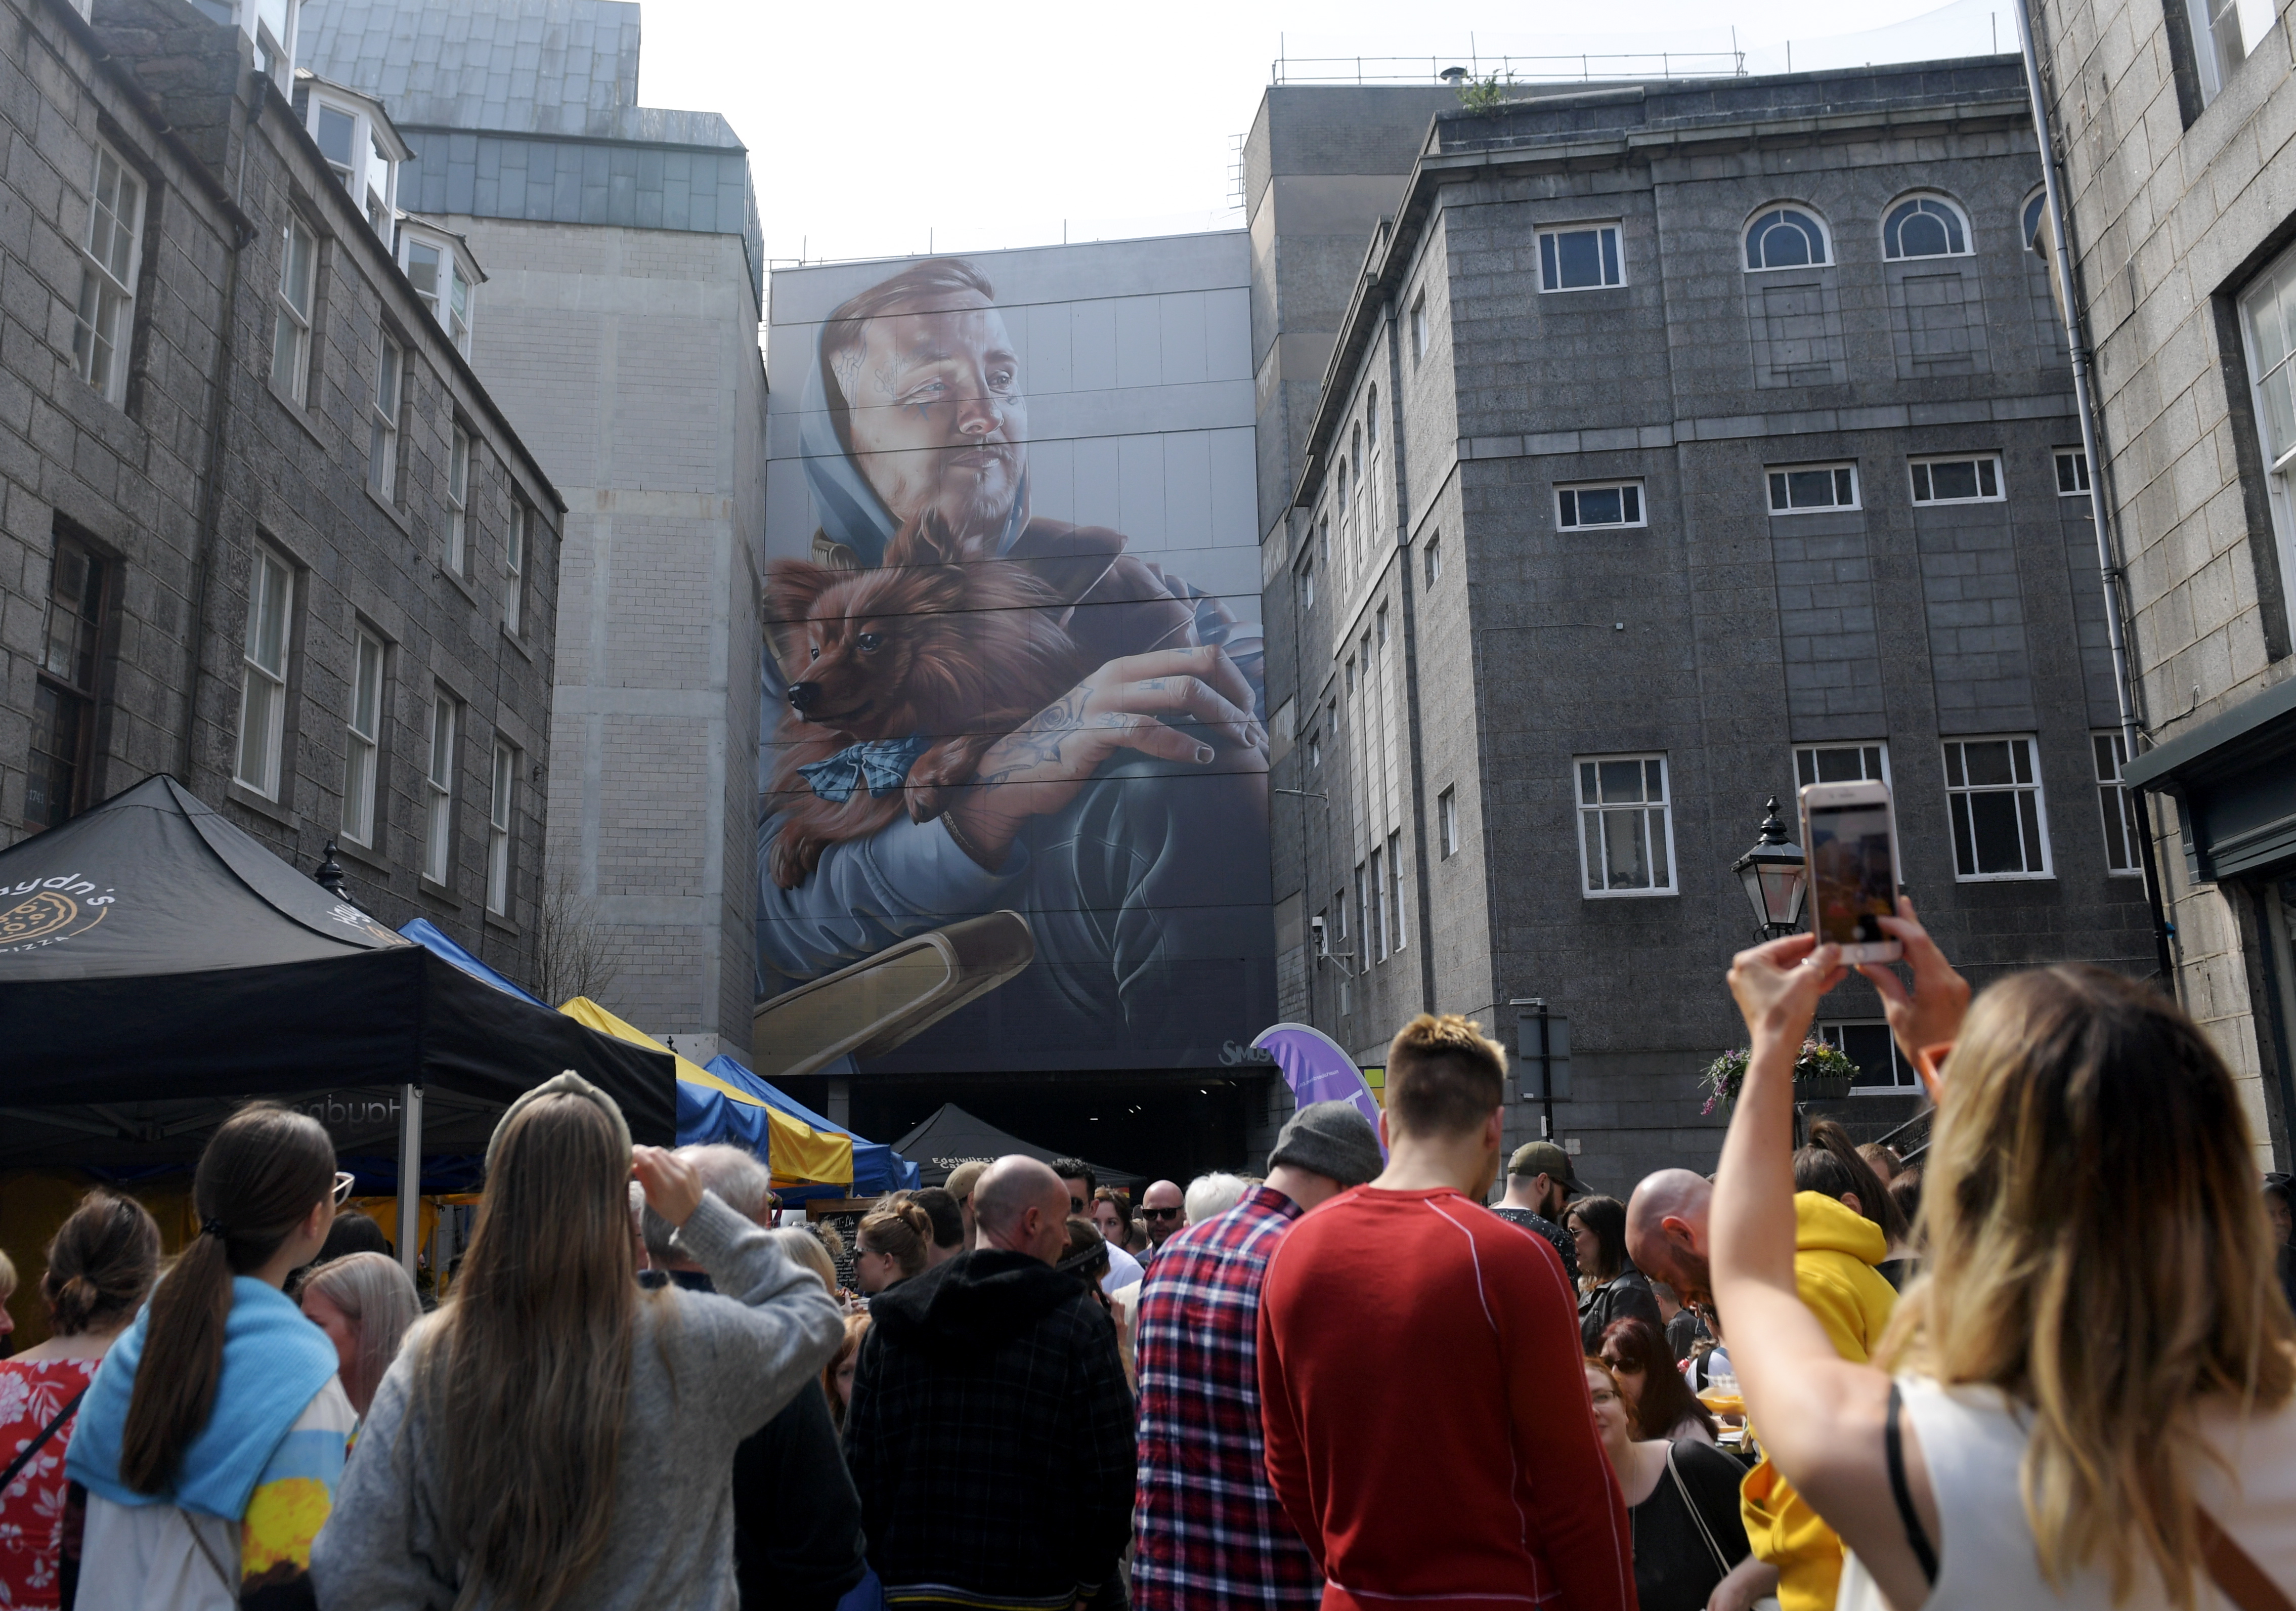 SMUG'S work at The Green. Aberdeen Inspired helps to put on events such as the city's Nuart street art festival.